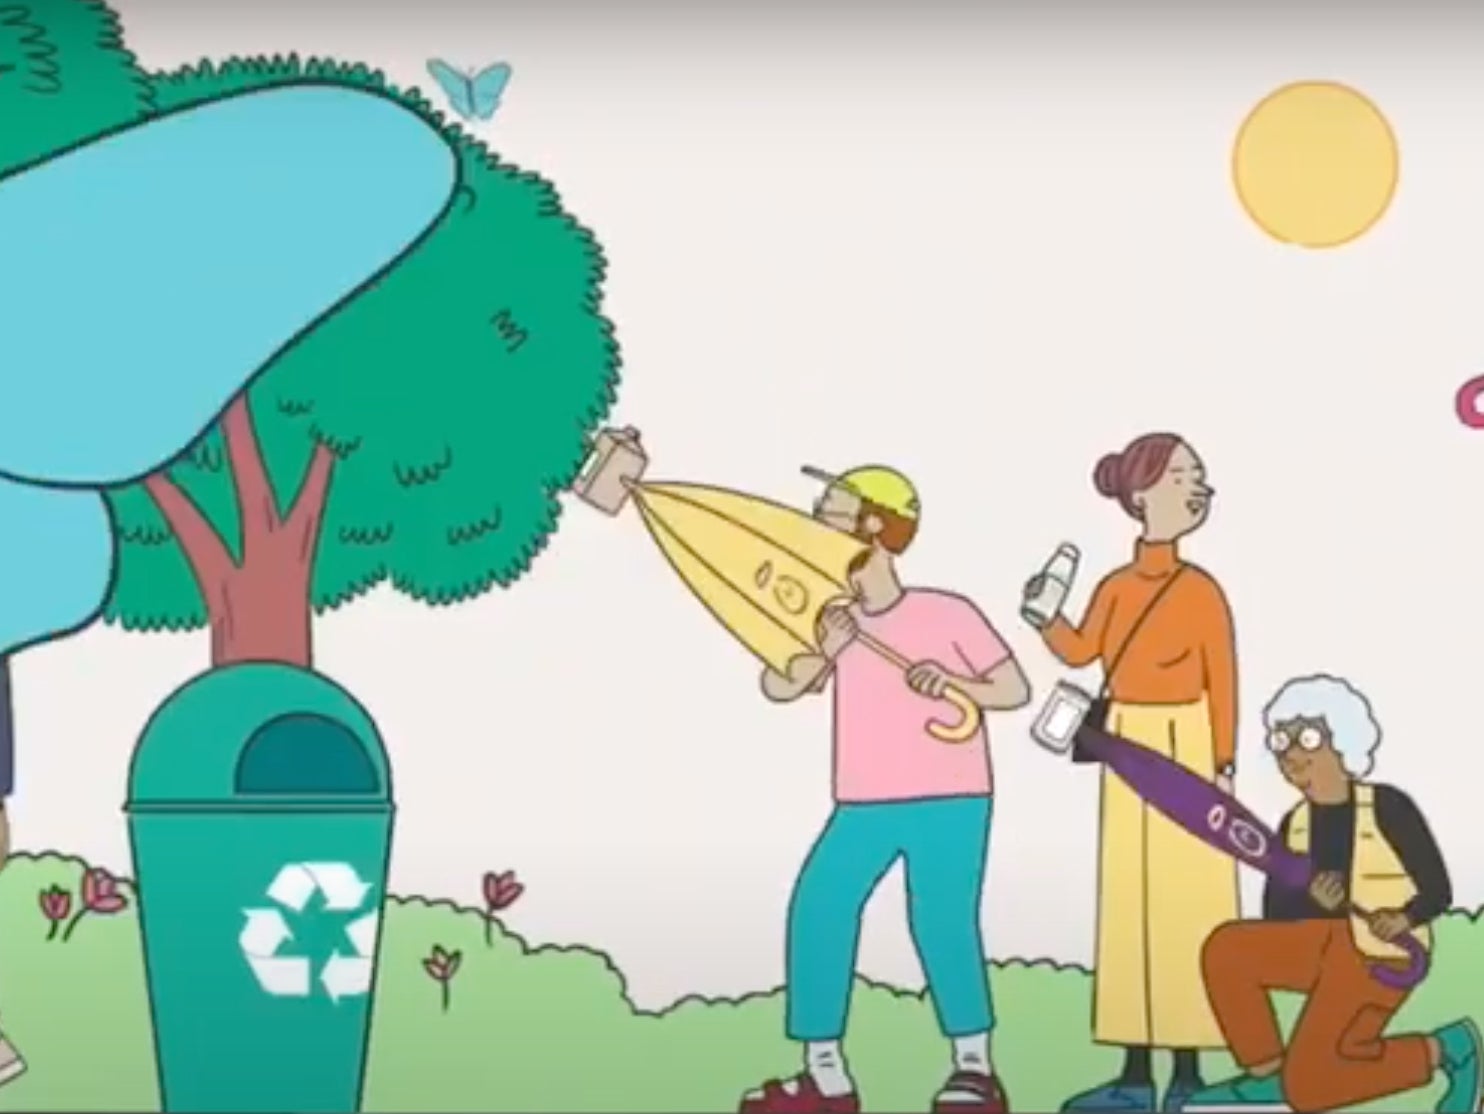 Innocent Drinks advert shows people ‘fixing up the planet’ using umbrellas bearing its logo